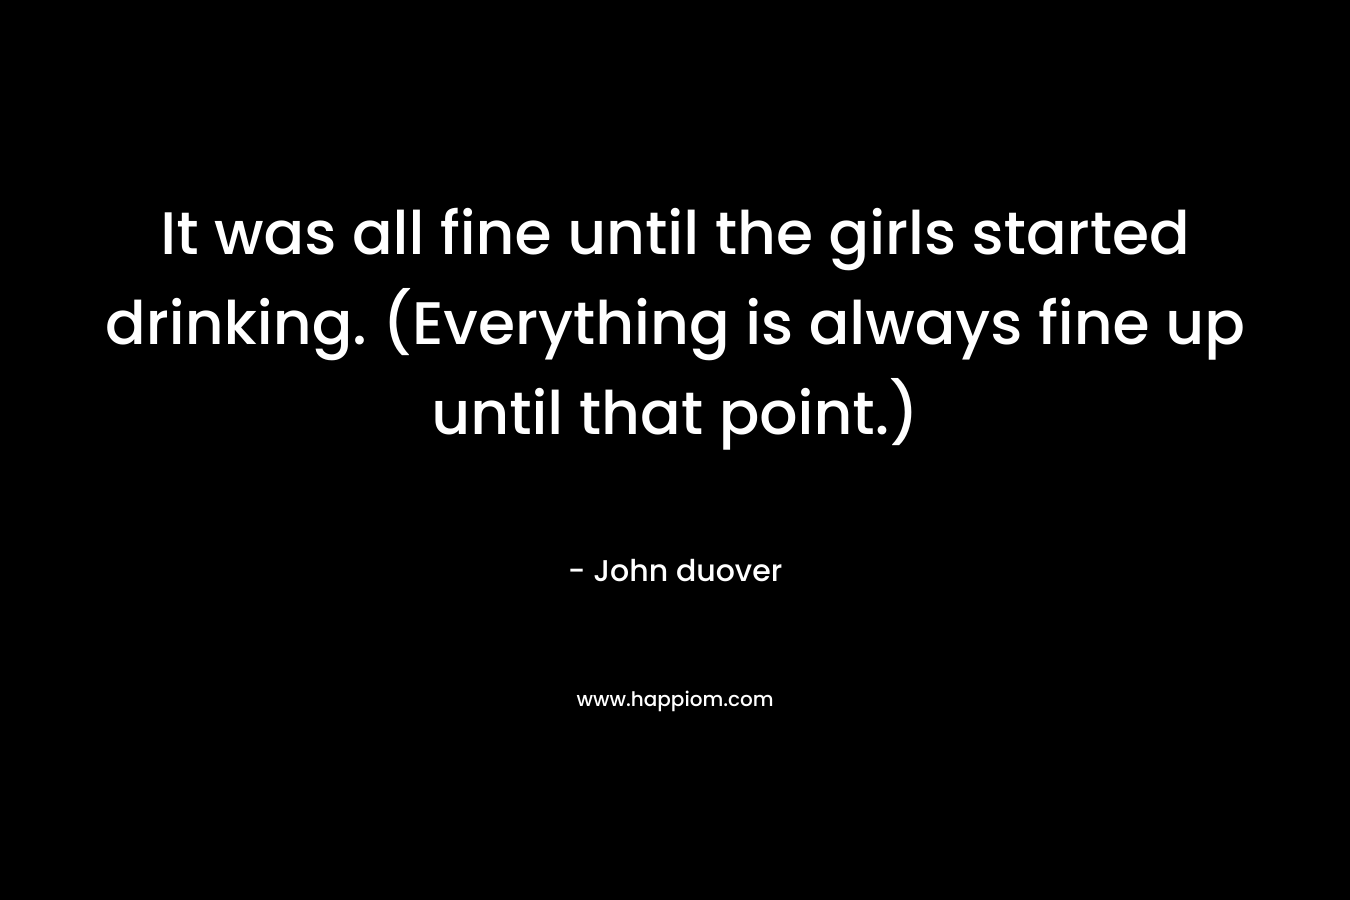 It was all fine until the girls started drinking. (Everything is always fine up until that point.) – John duover